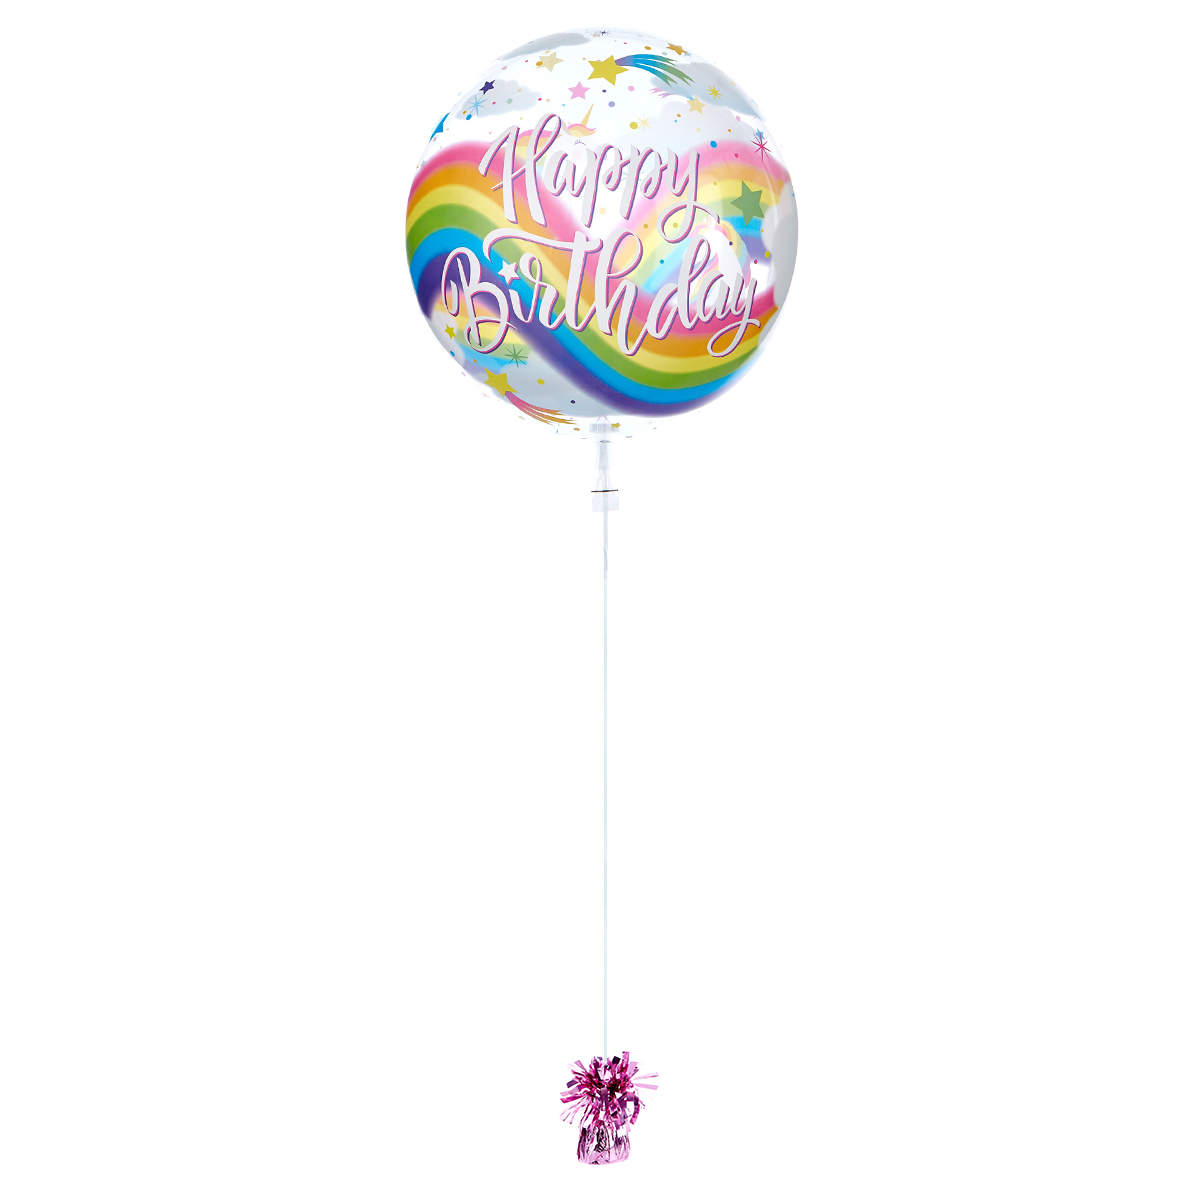 22-Inch Bubble Balloon - Happy Birthday, Unicorns - DELIVERED INFLATED!